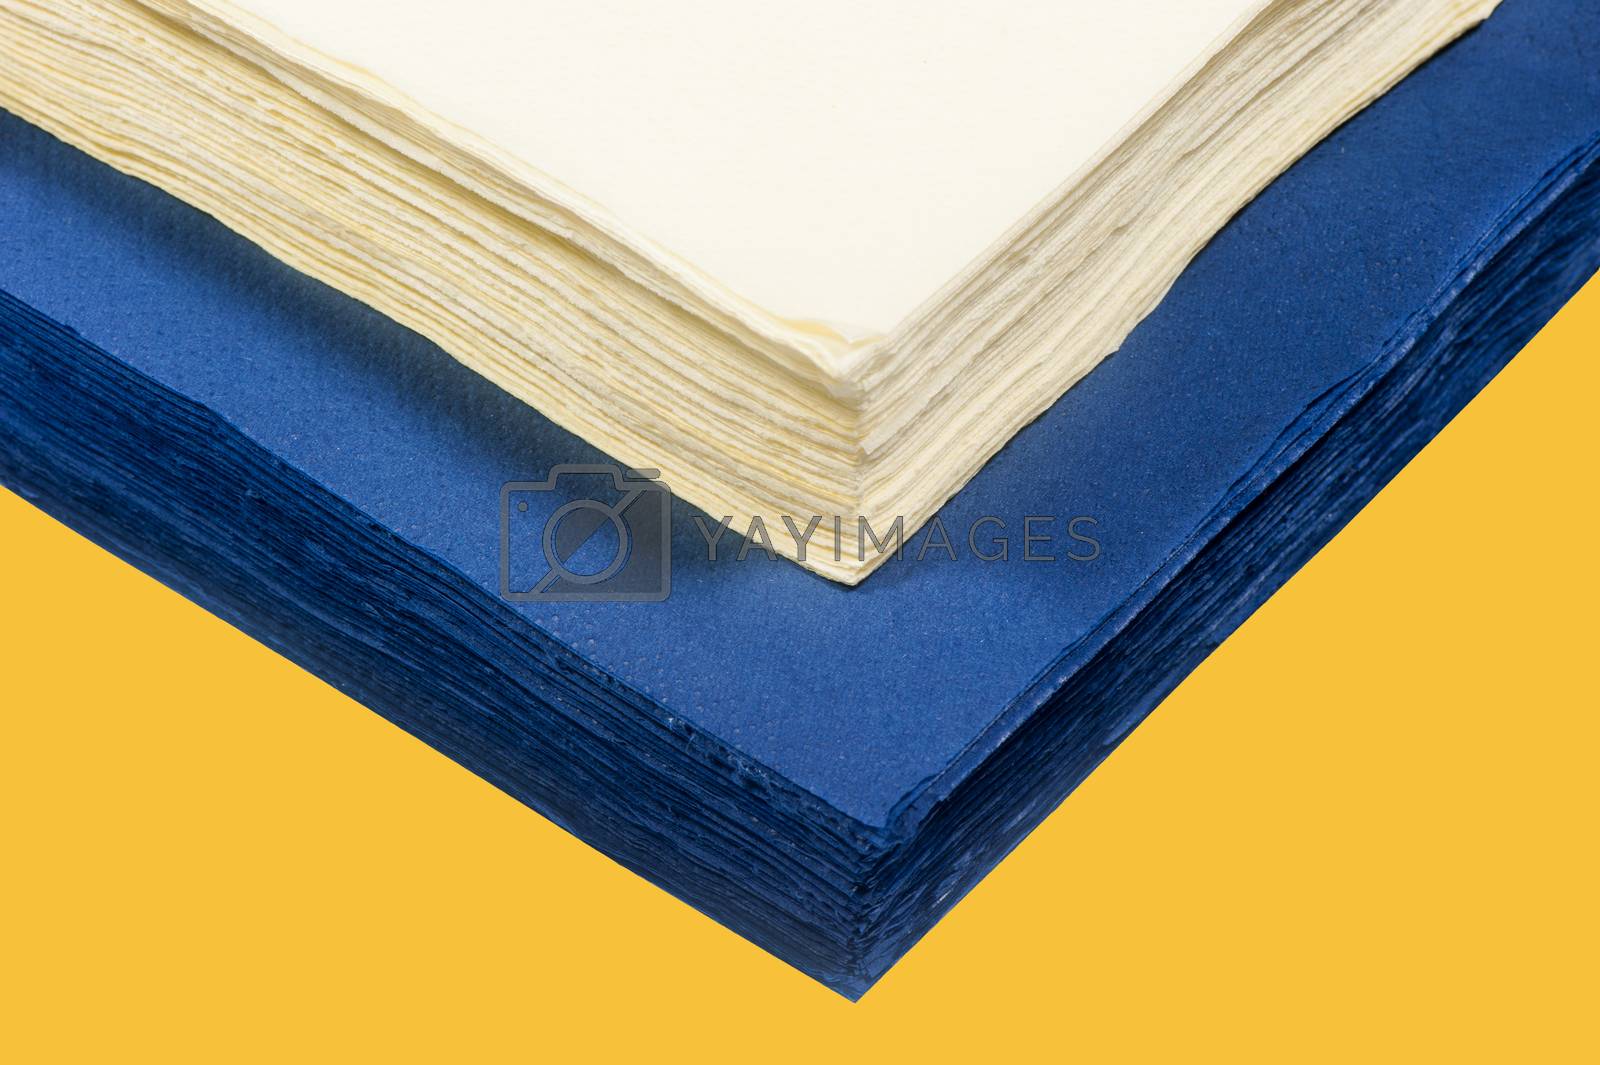 Royalty free image of colored paper napkins by carla720